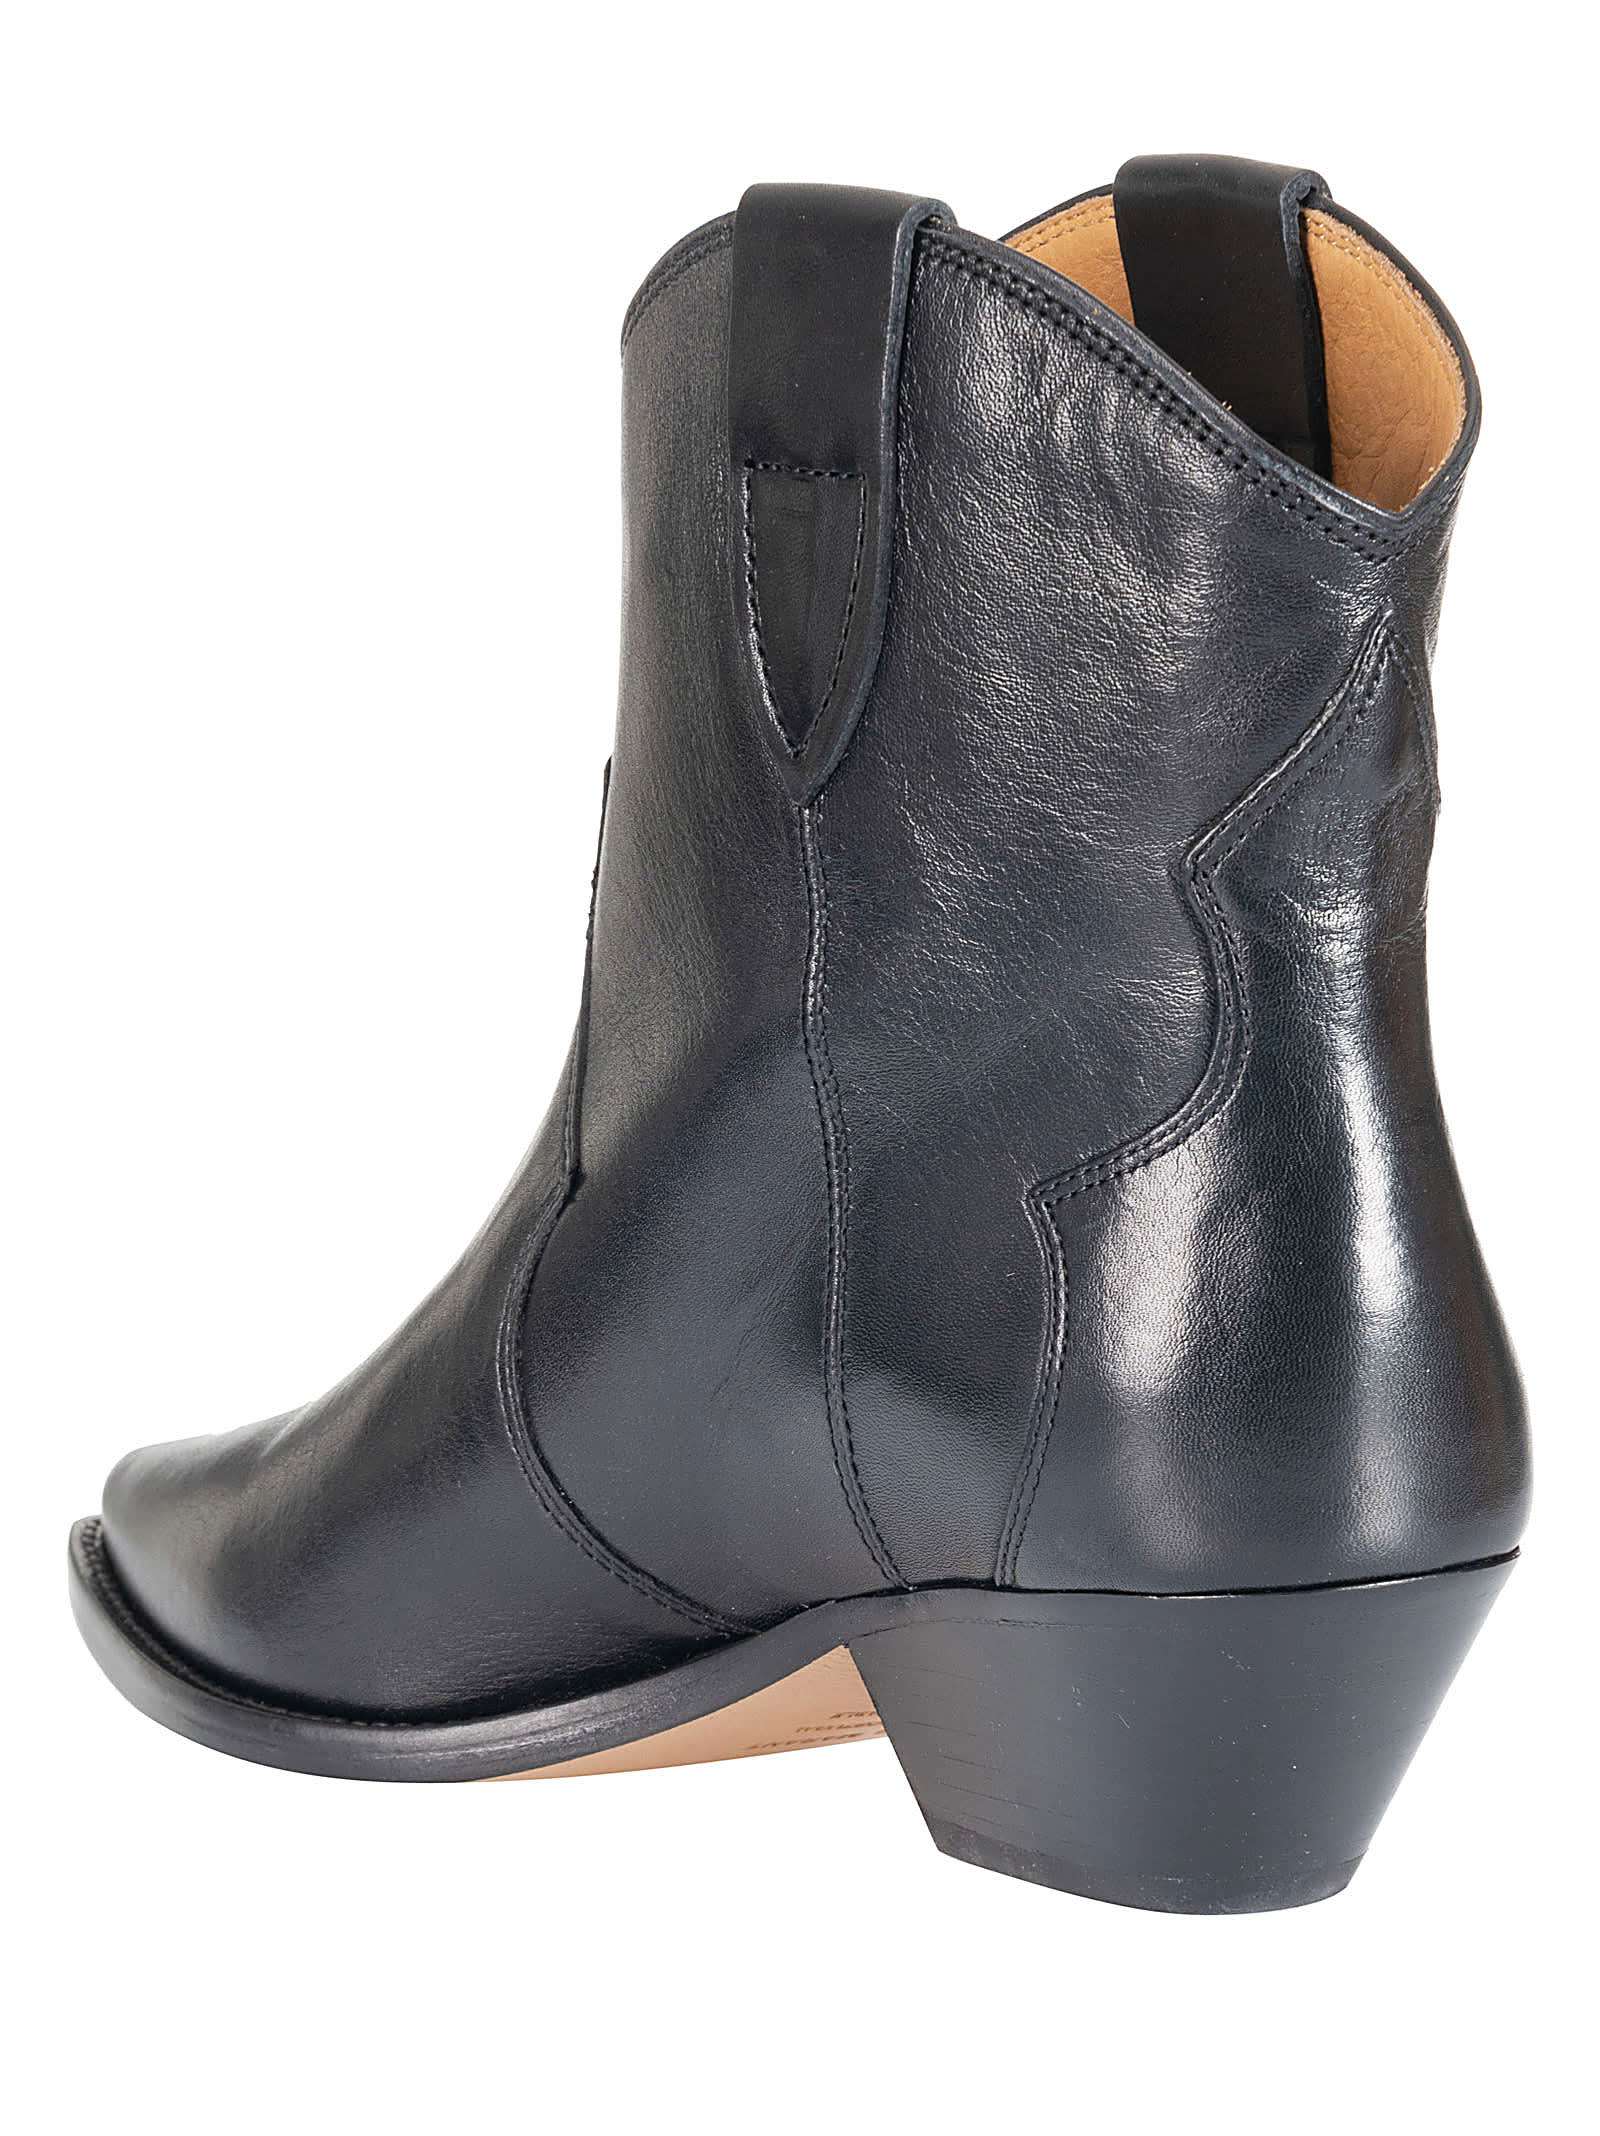 isabel marant ankle boots sale